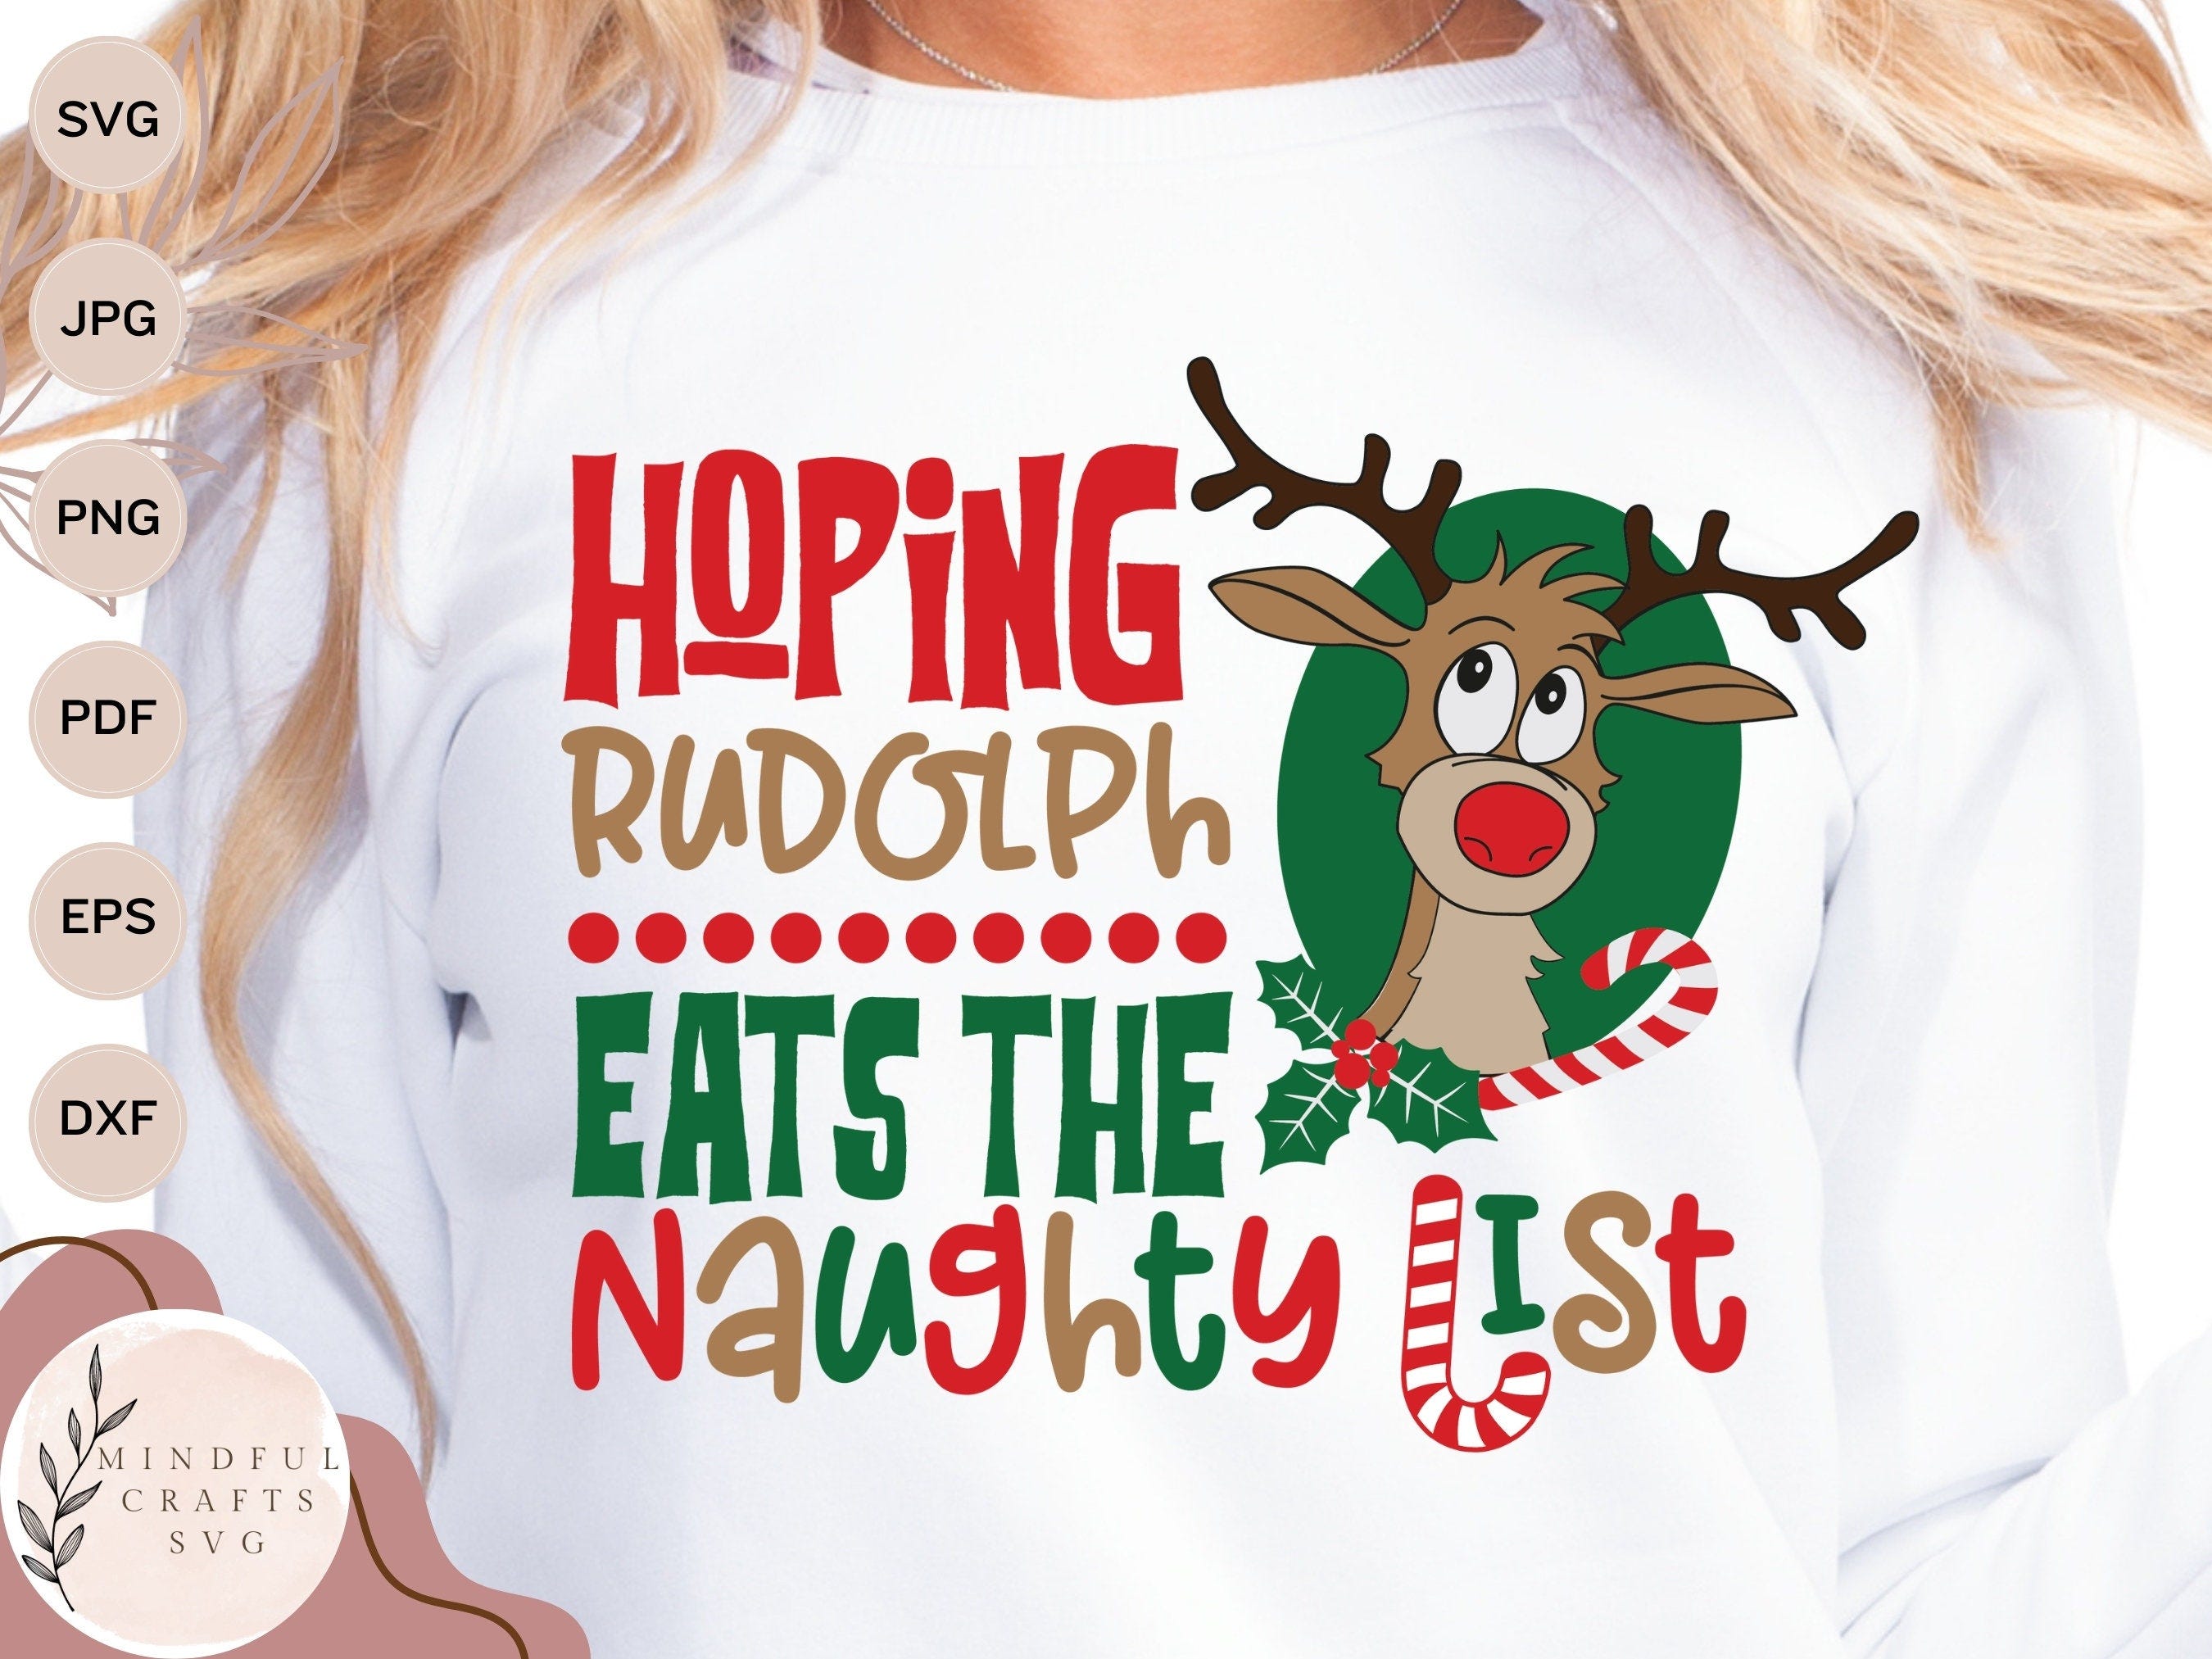 Hoping Rudolph Eats The Naughty Svg Christmas Svg Svg Files For Cricut Instant Download Christmas Shirt Svg Rudolph Svg Naughty List Svg